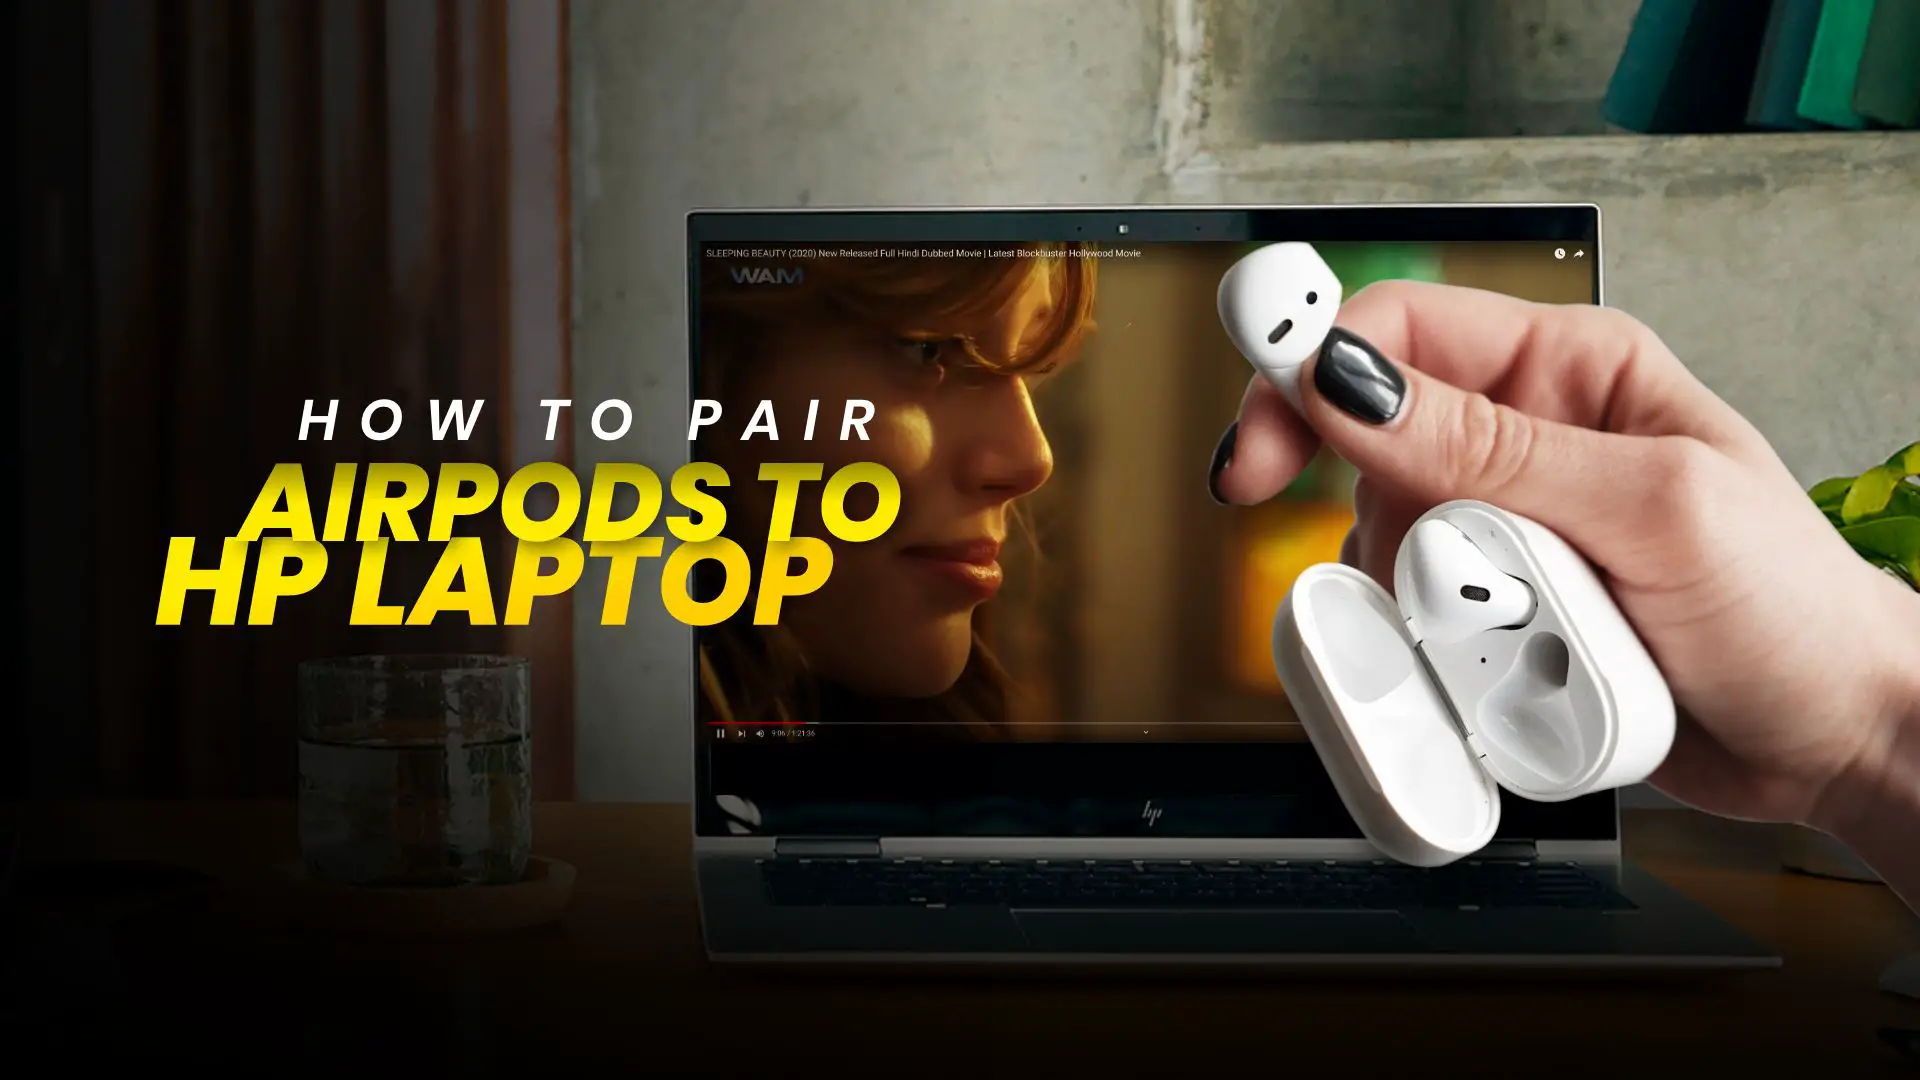 How to Pair AirPods to HP Laptop – Step by Step Guide